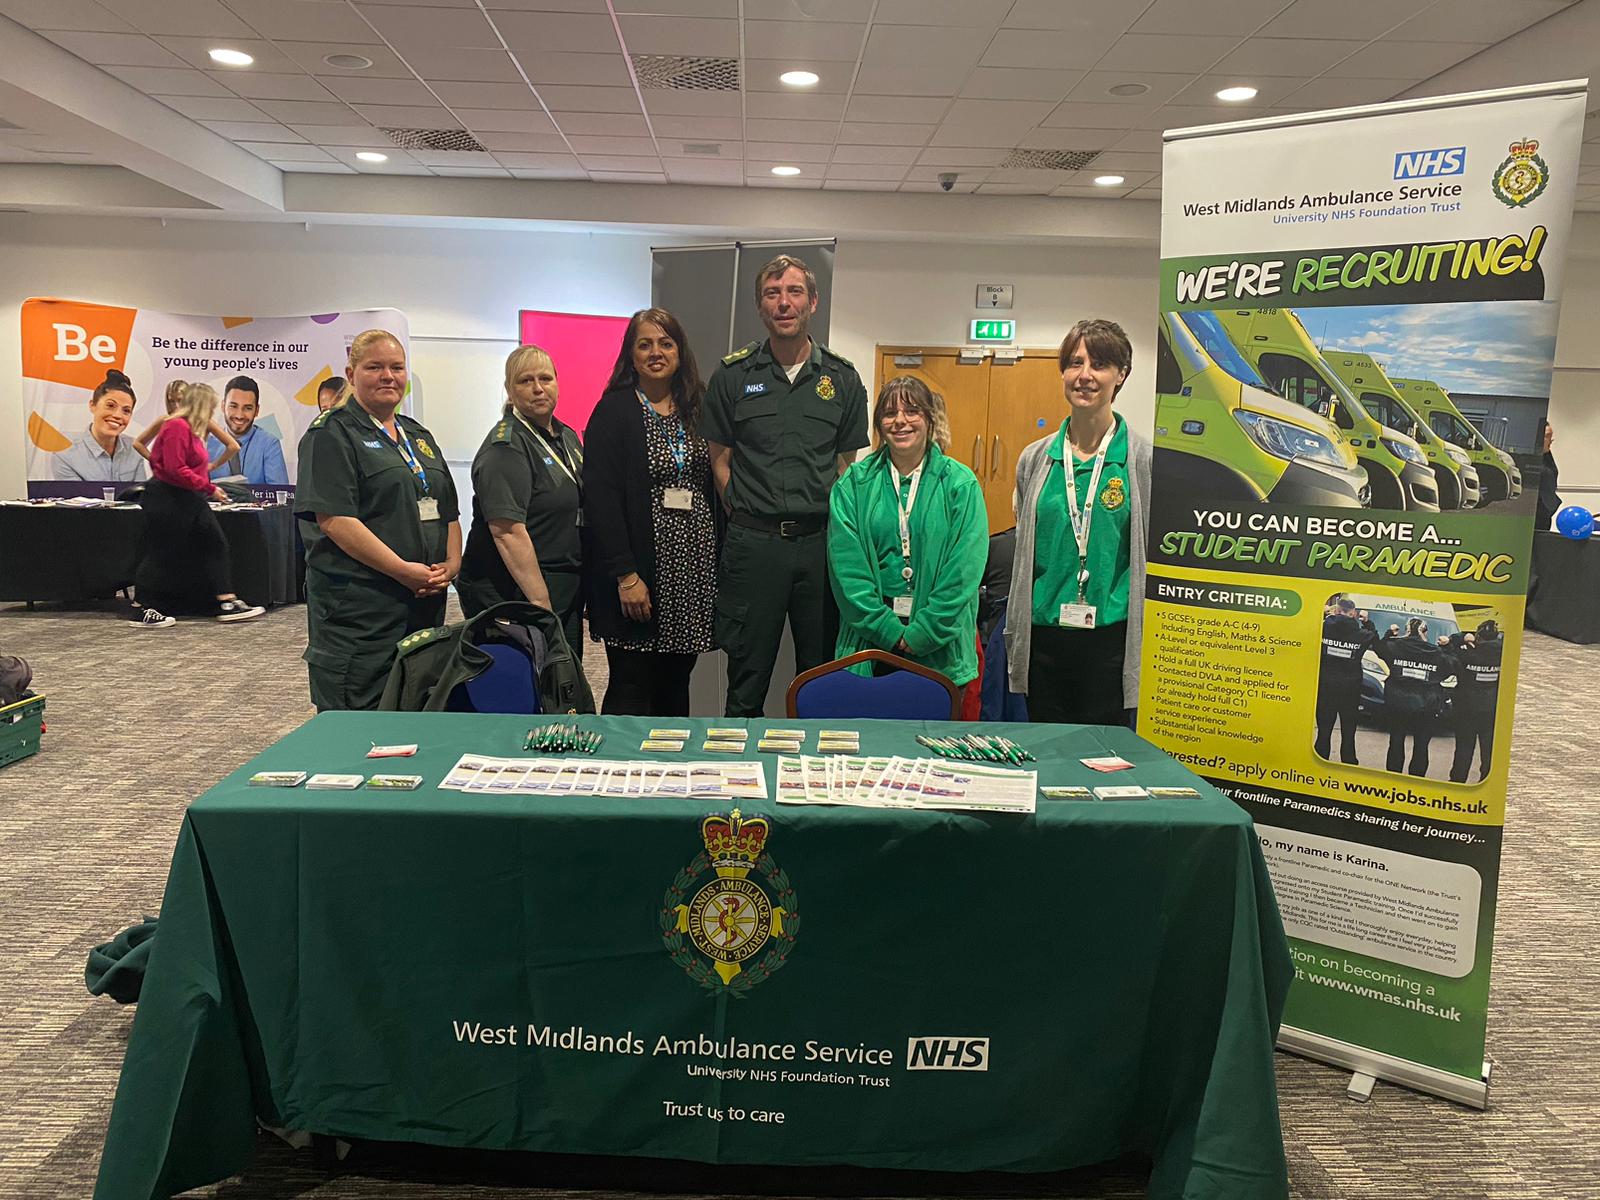 West Midlands Ambulance at our event in Coventry